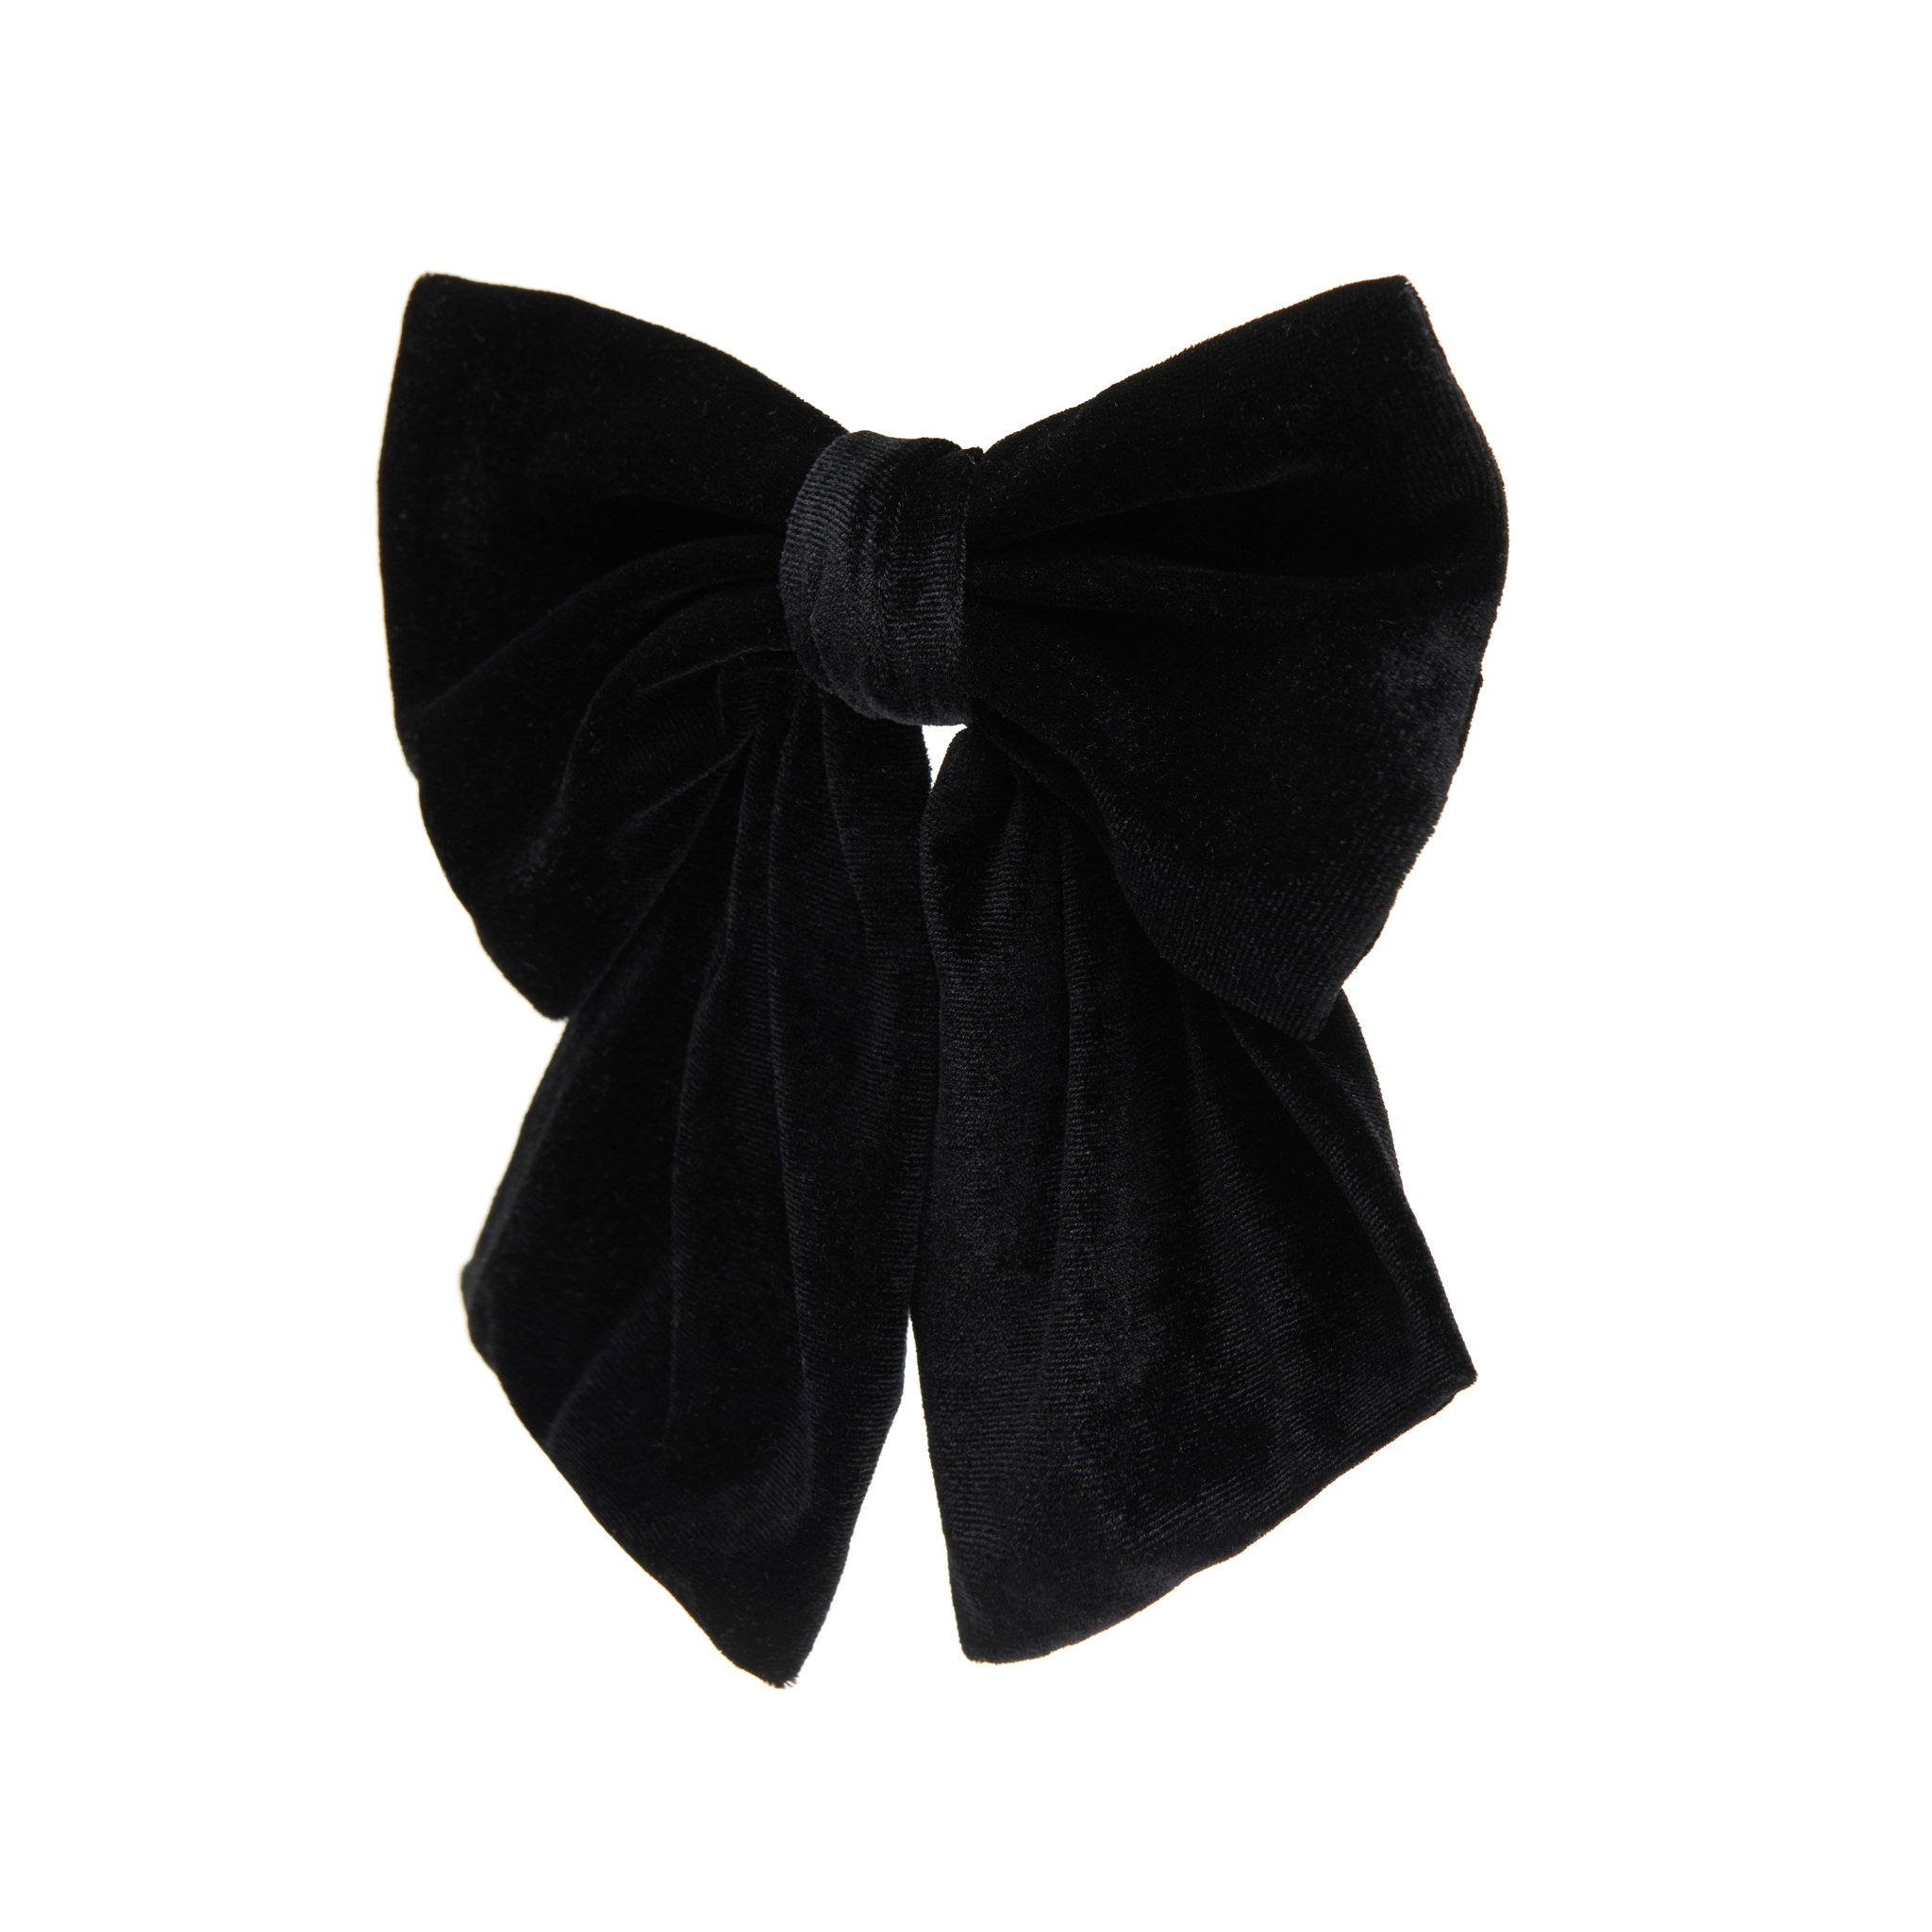 temperament velvet big bow butterfly hairpin hair accessories for women girls fashion spring clip clamps HOLLY JUNE Заколка Big Bow Hair Clip – Velvet Black